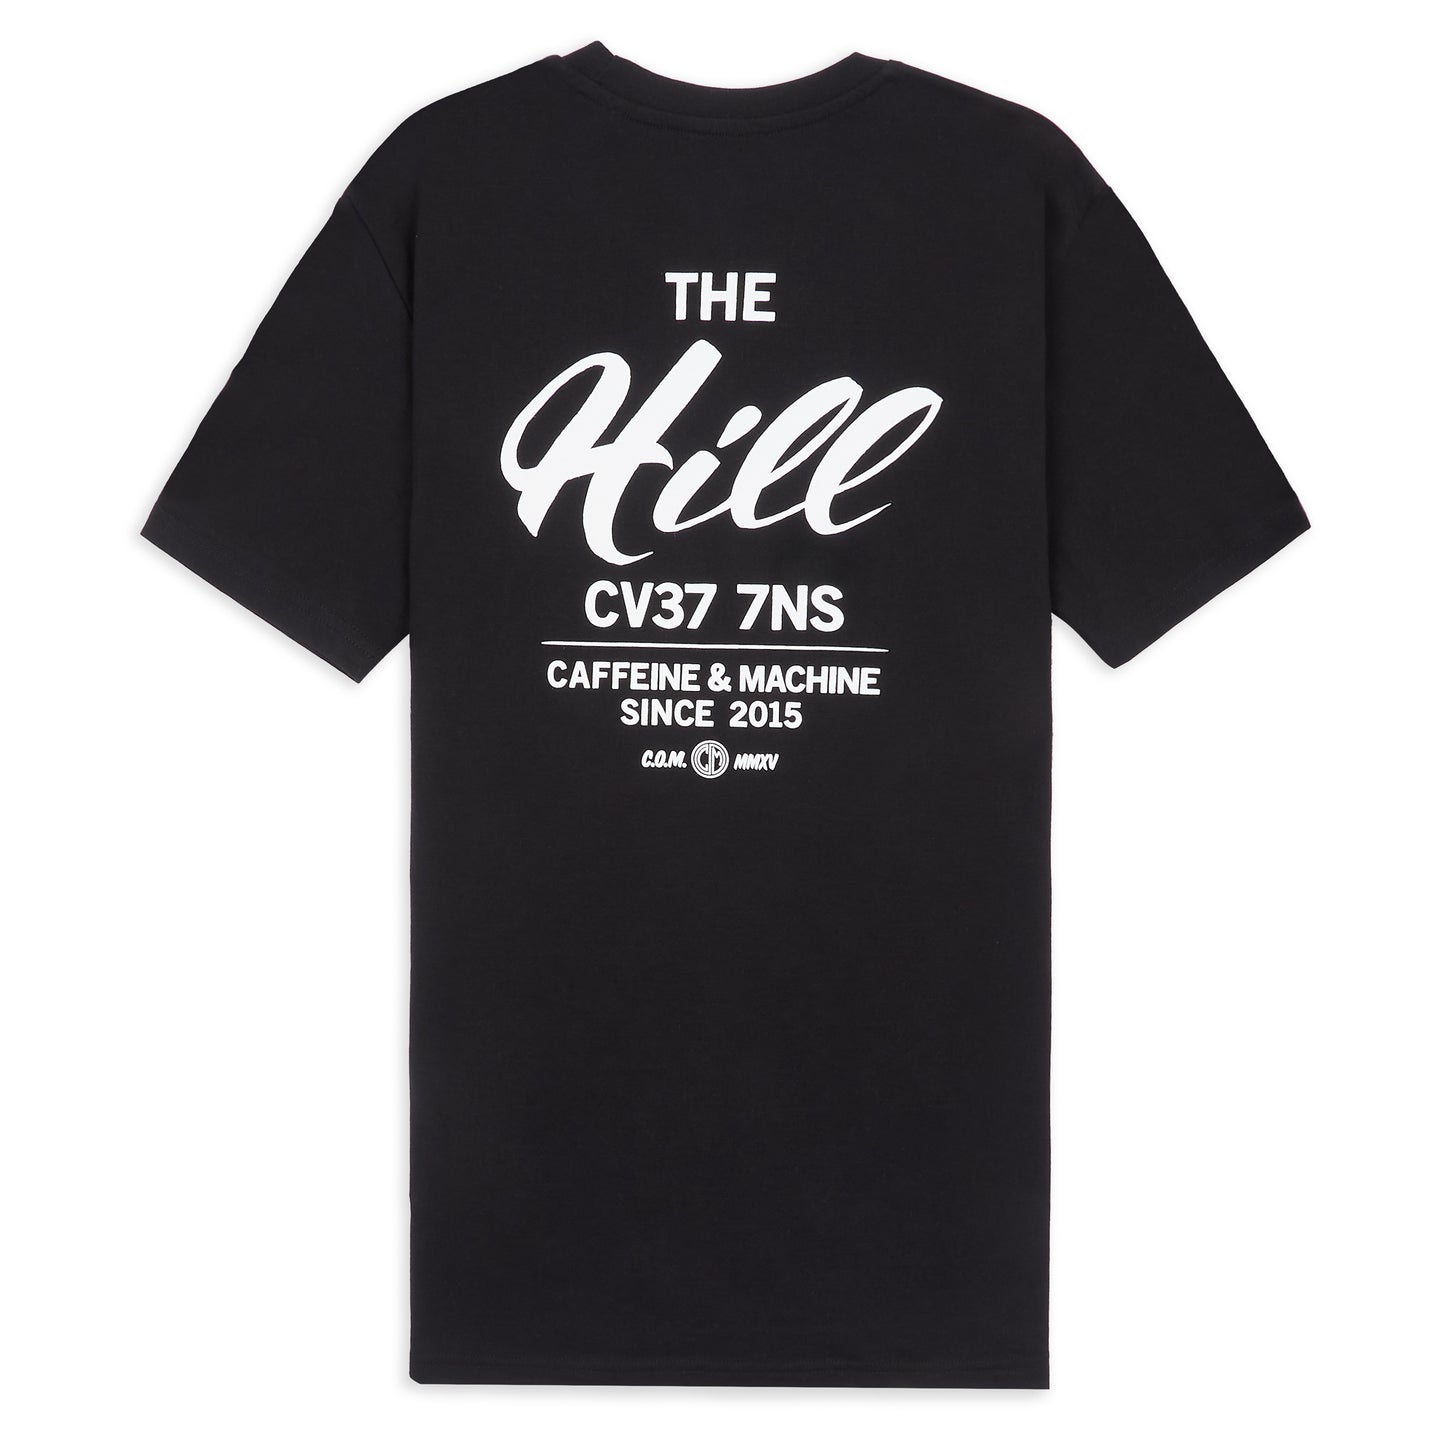 The Hill. Tee. Black